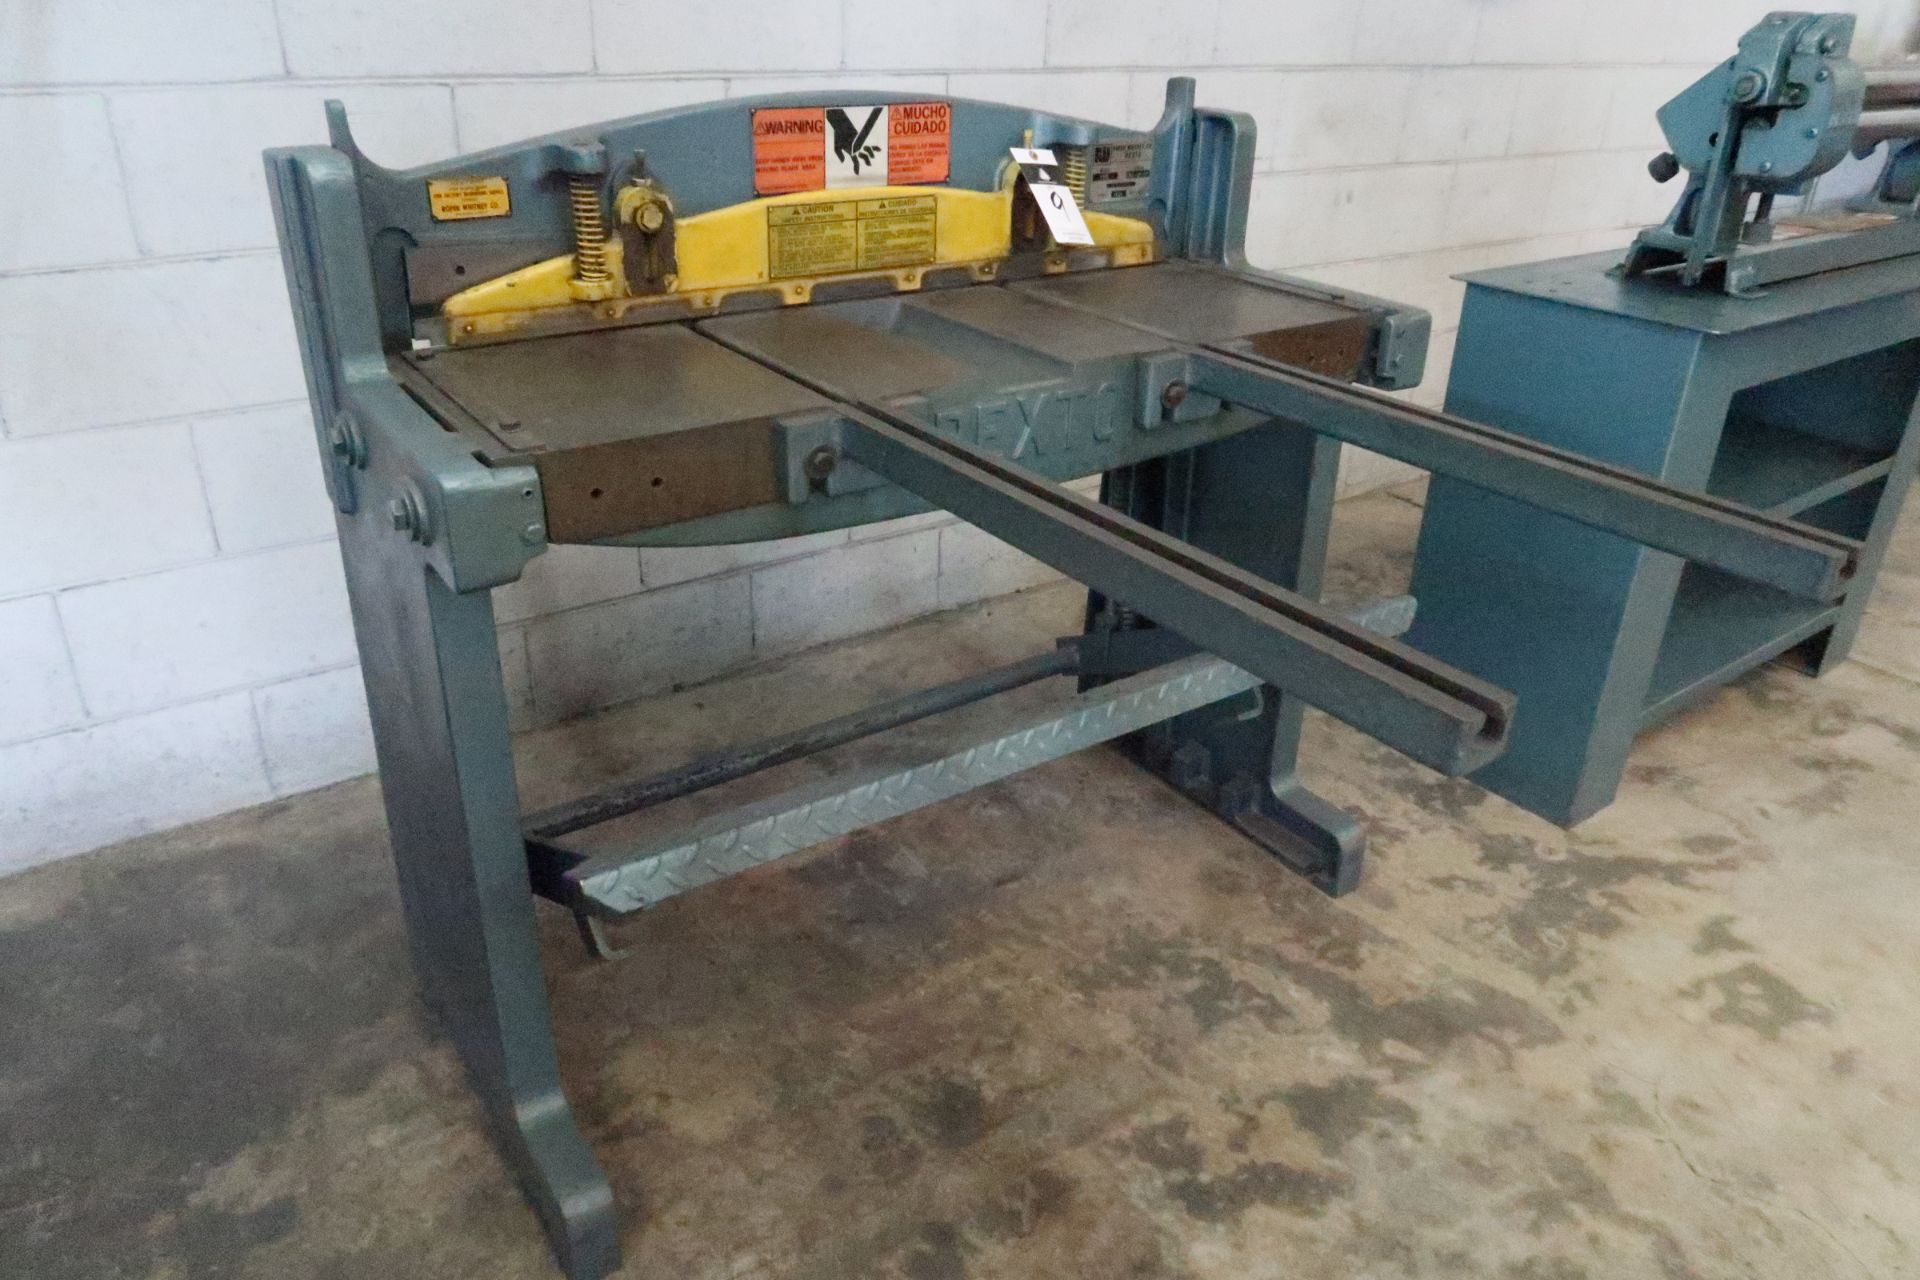 2000 Roper Whitney / Pexto Foot Shear 16 GA. X 36”. This item is Sold AS Is and with No Warranty - Image 2 of 6